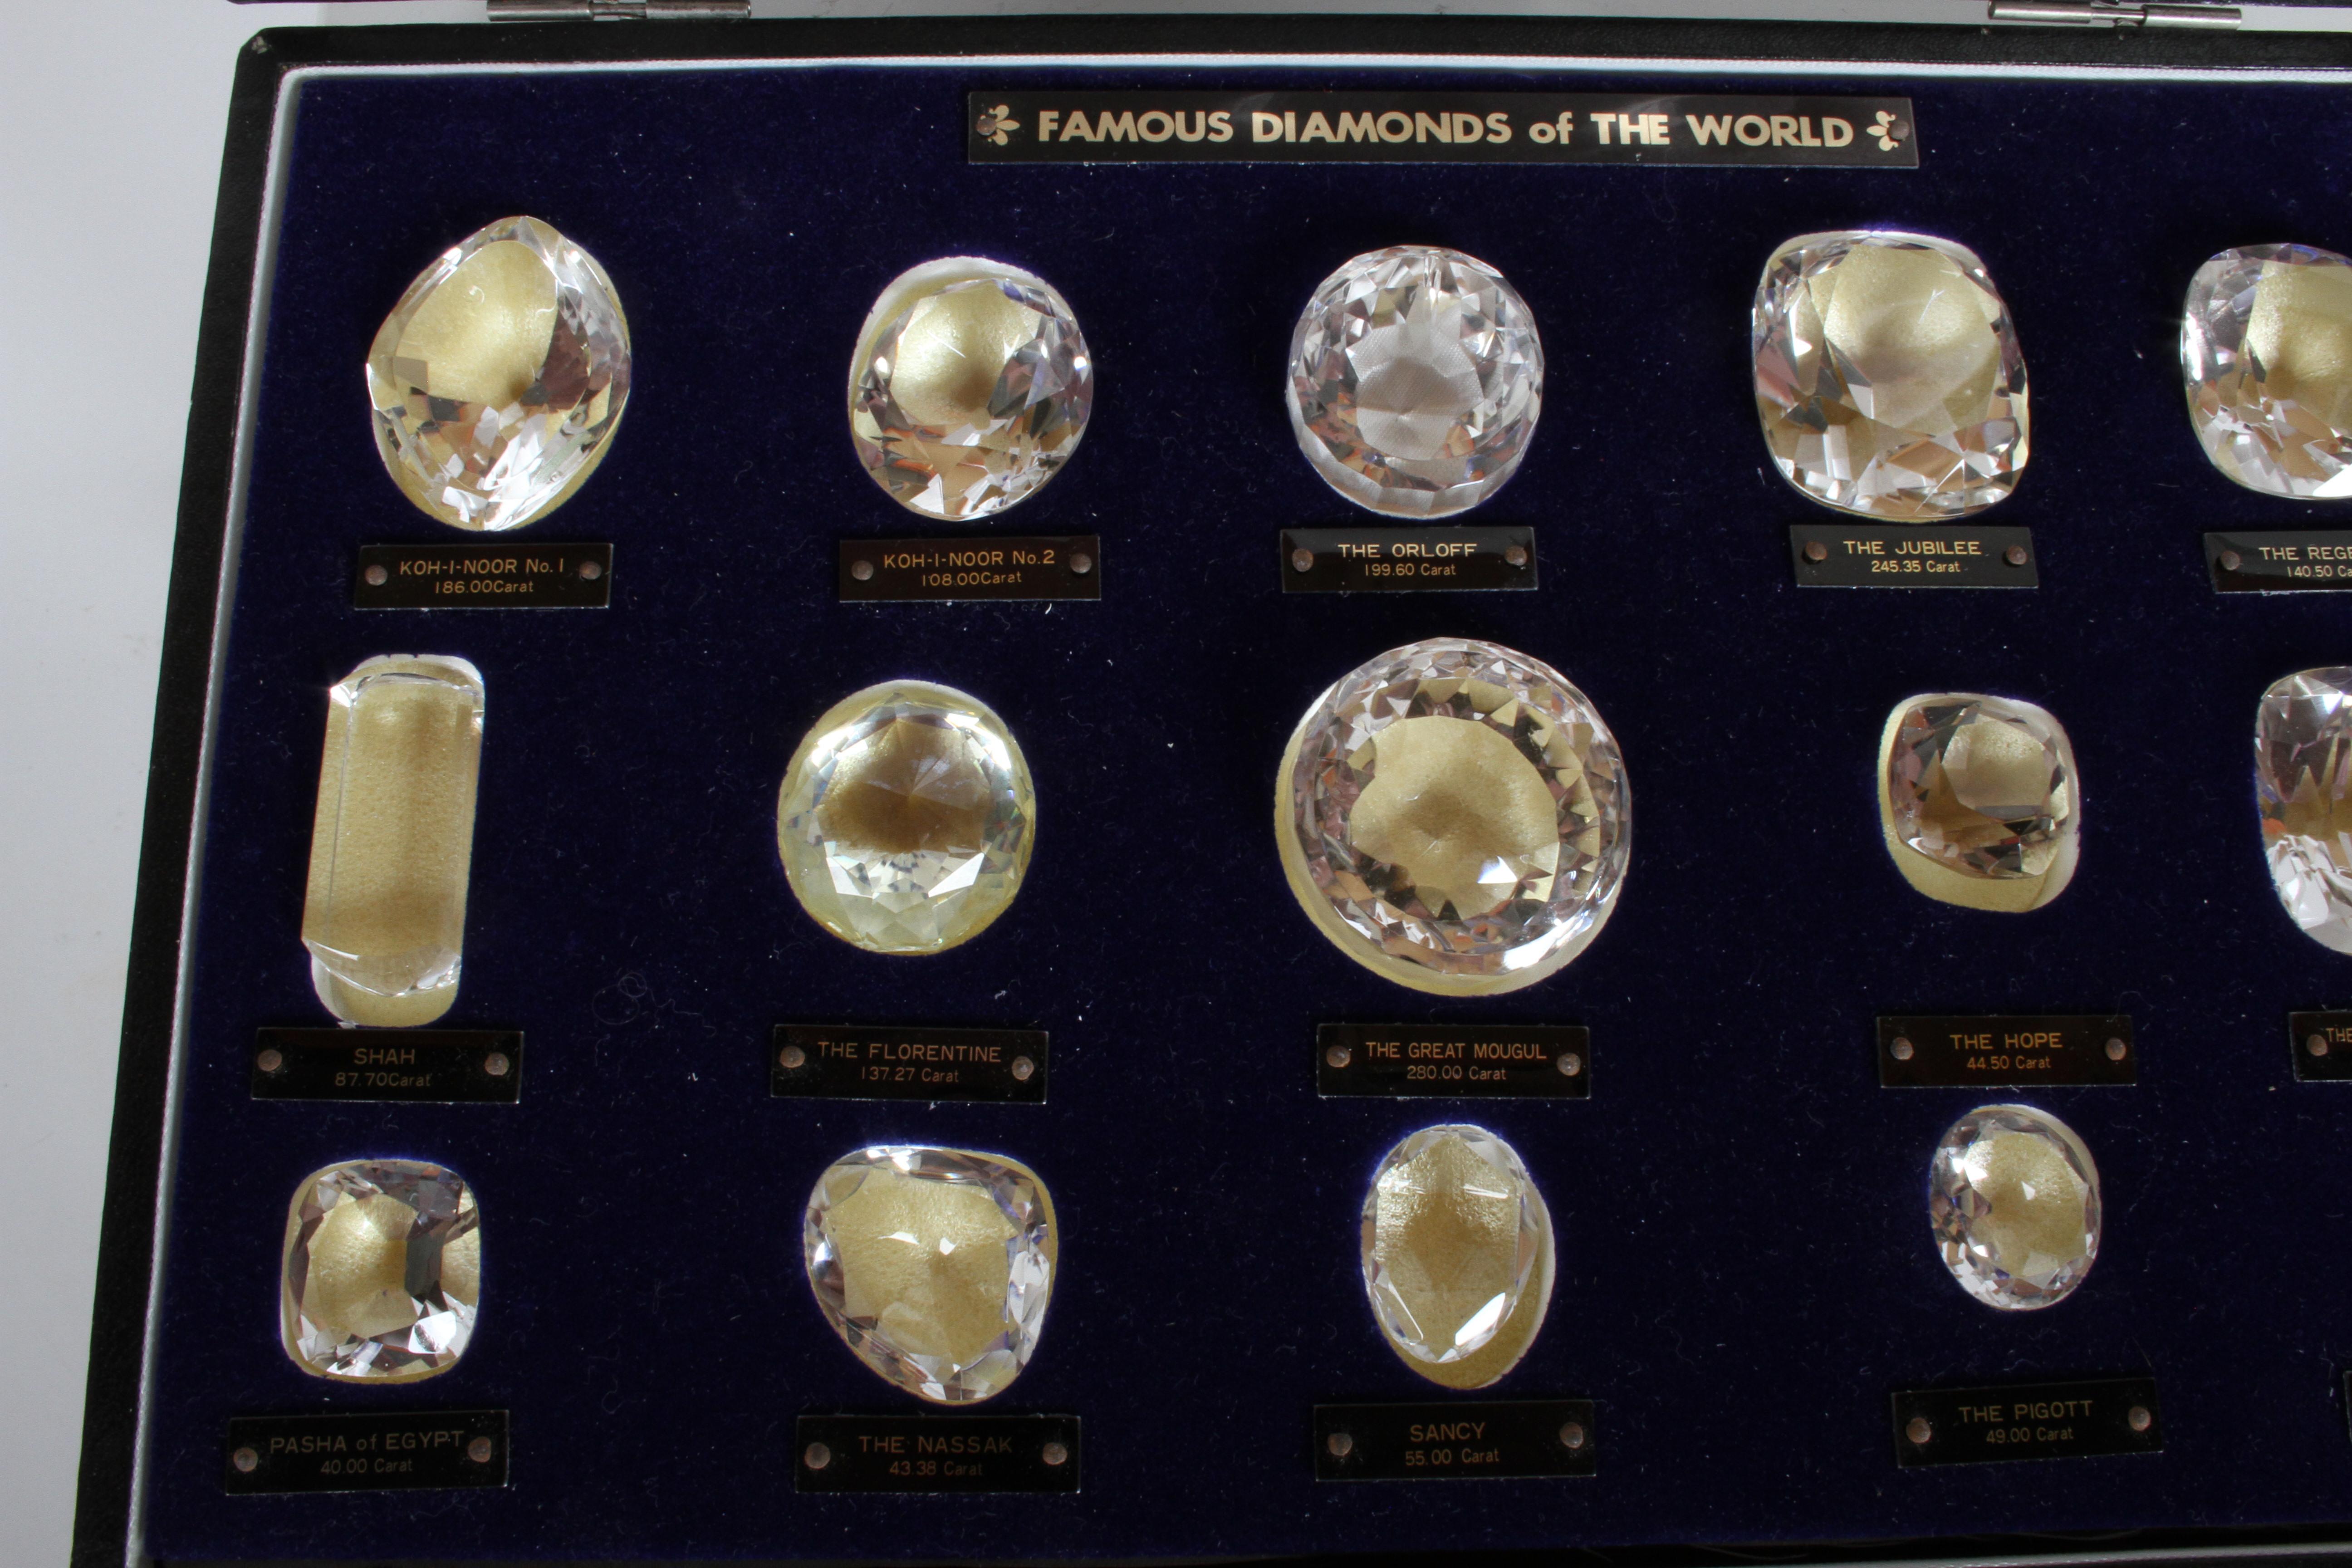 Antique Set of 15 Historical & Famous Diamonds of the World Replicas in a Case 3